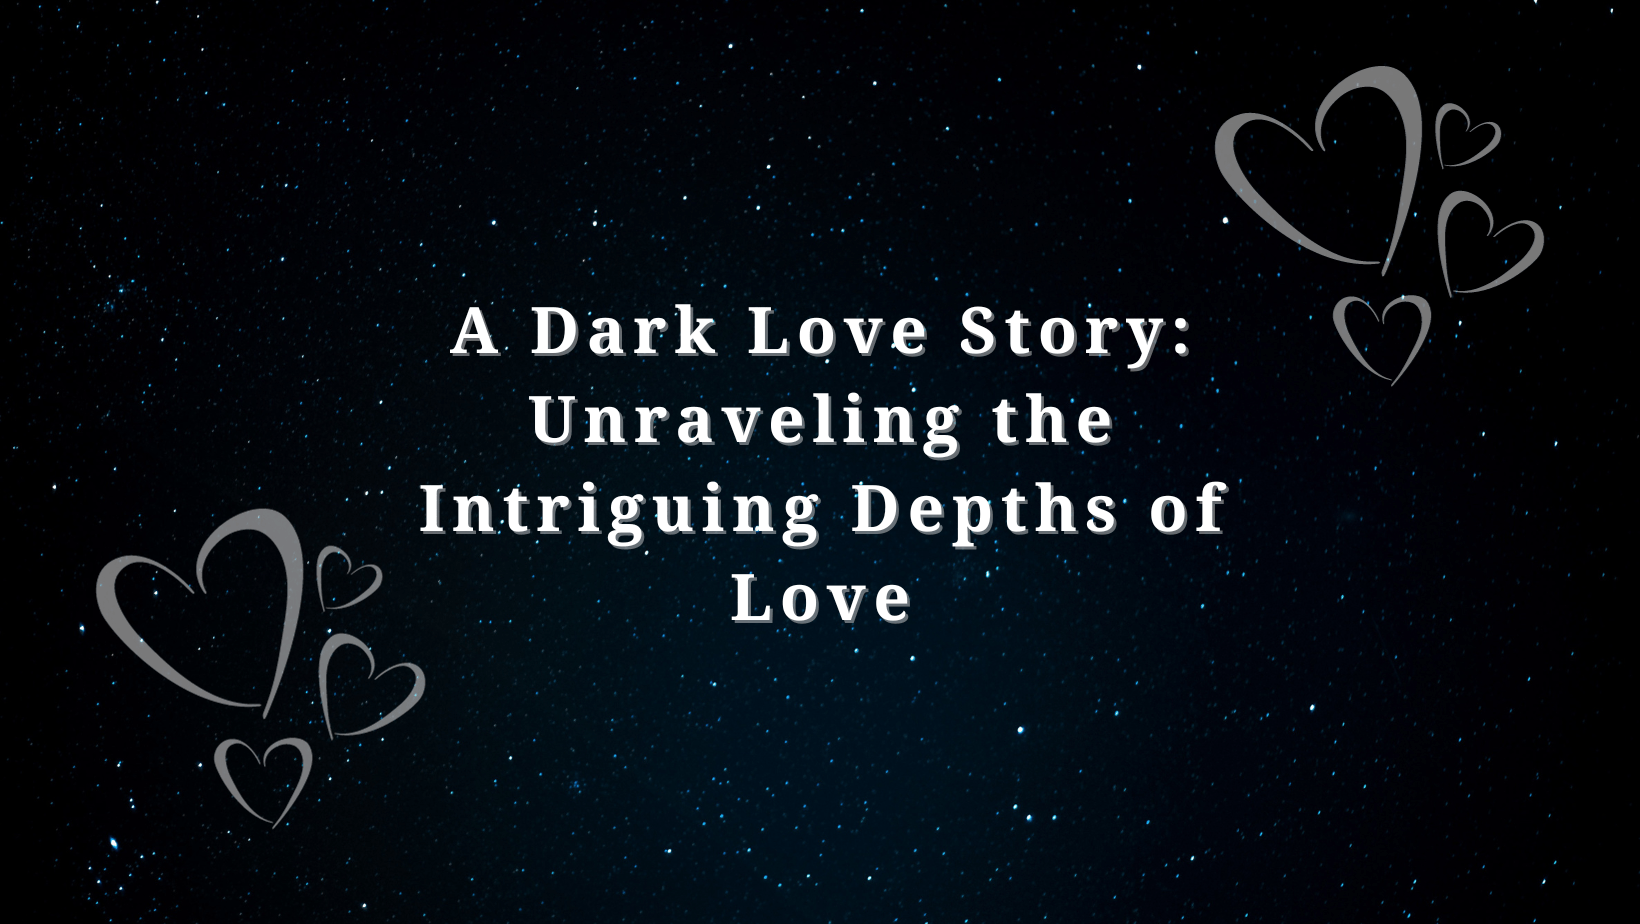 A Dark Love Story: Unraveling the Intriguing Depths of Love